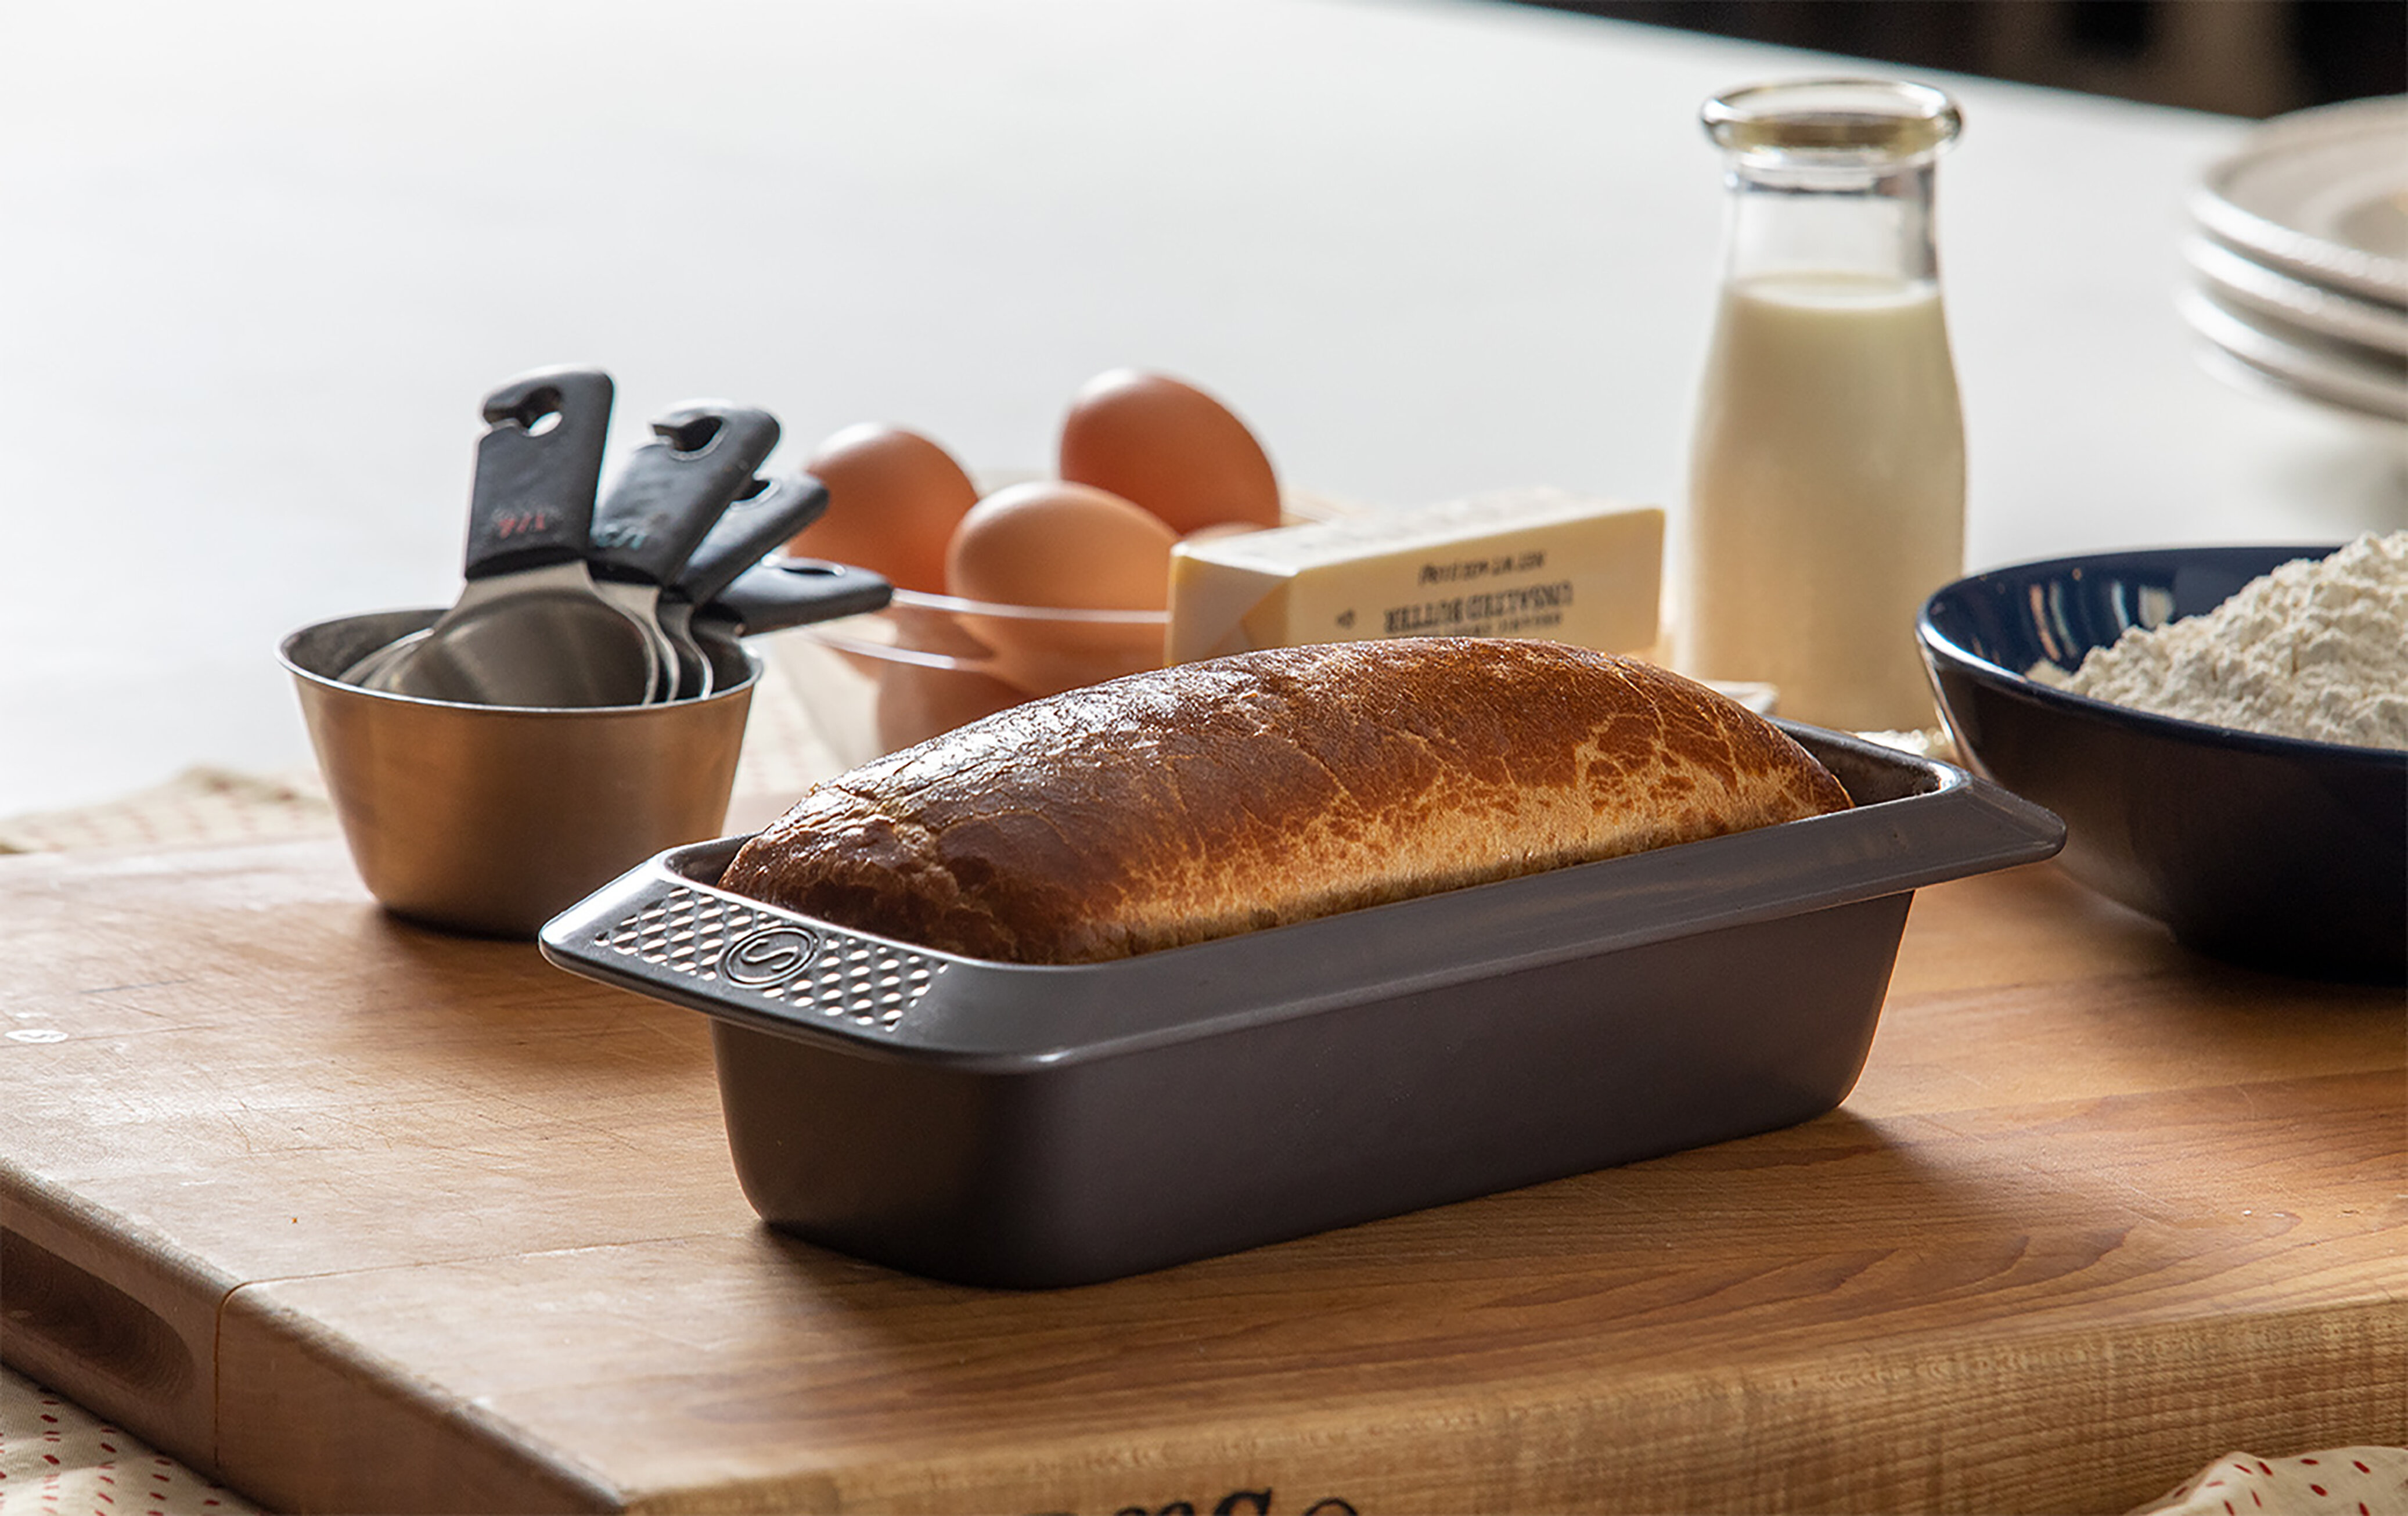 Loaf Pan, Non-Stick, 9.25 x 5.25-In.